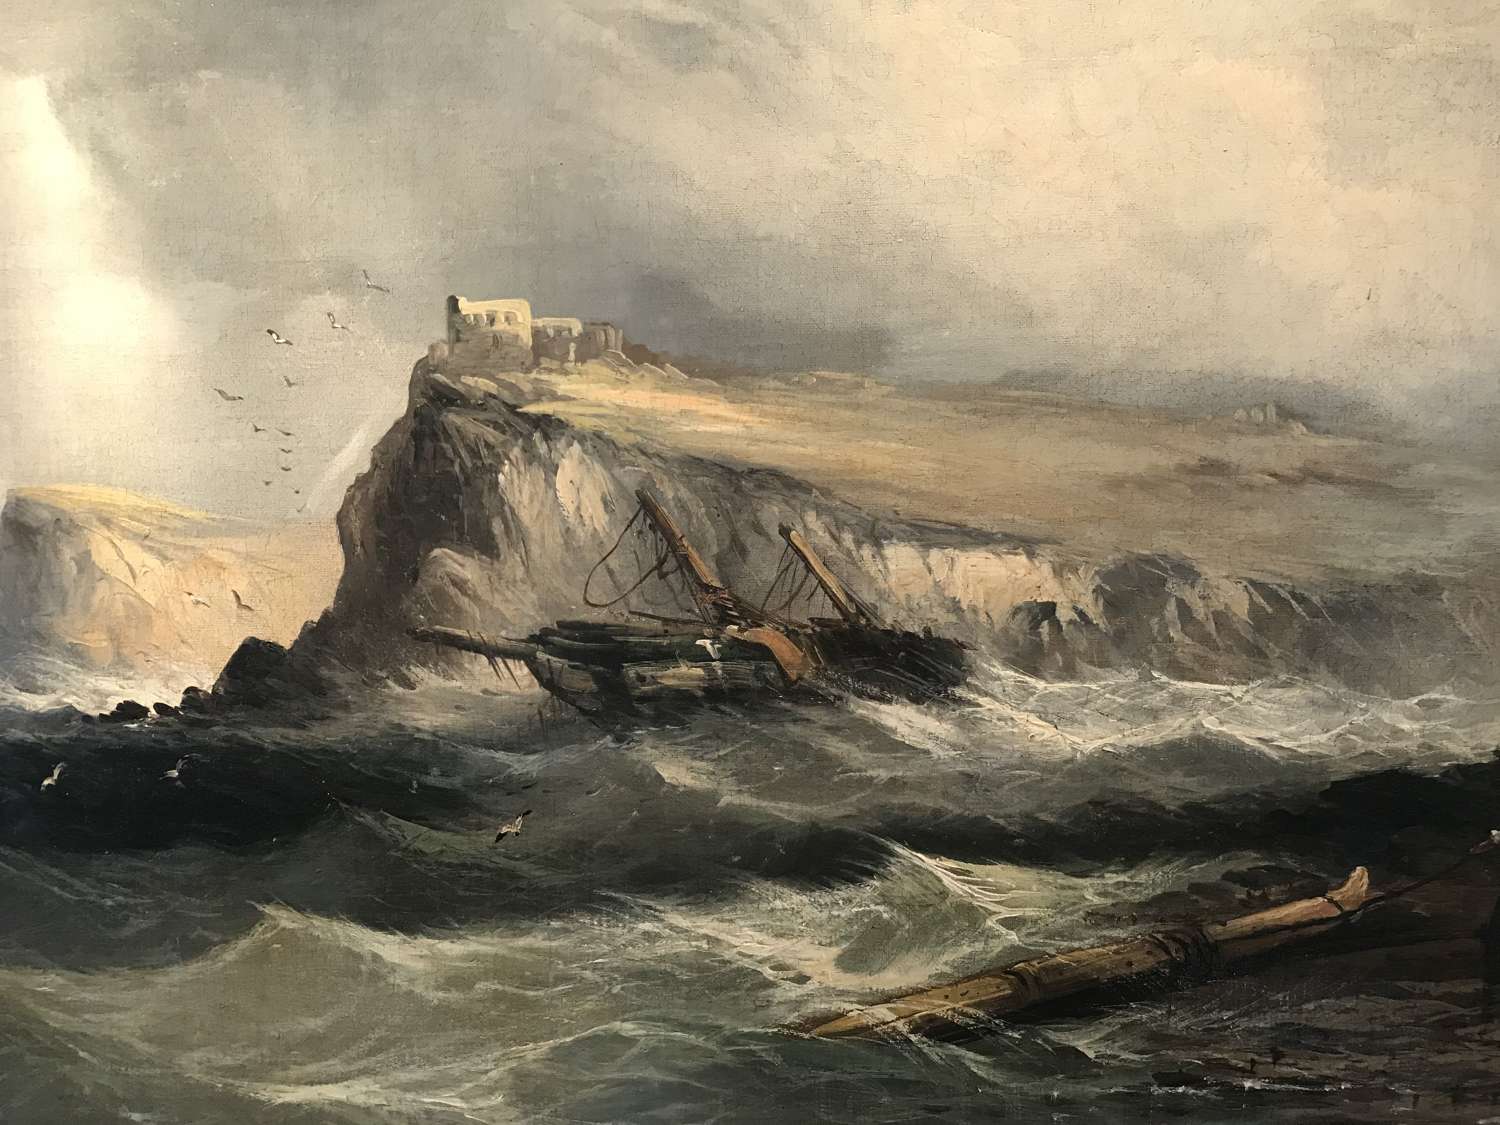 19th Marine oil painting of a wreck in the manner of JWM Turner